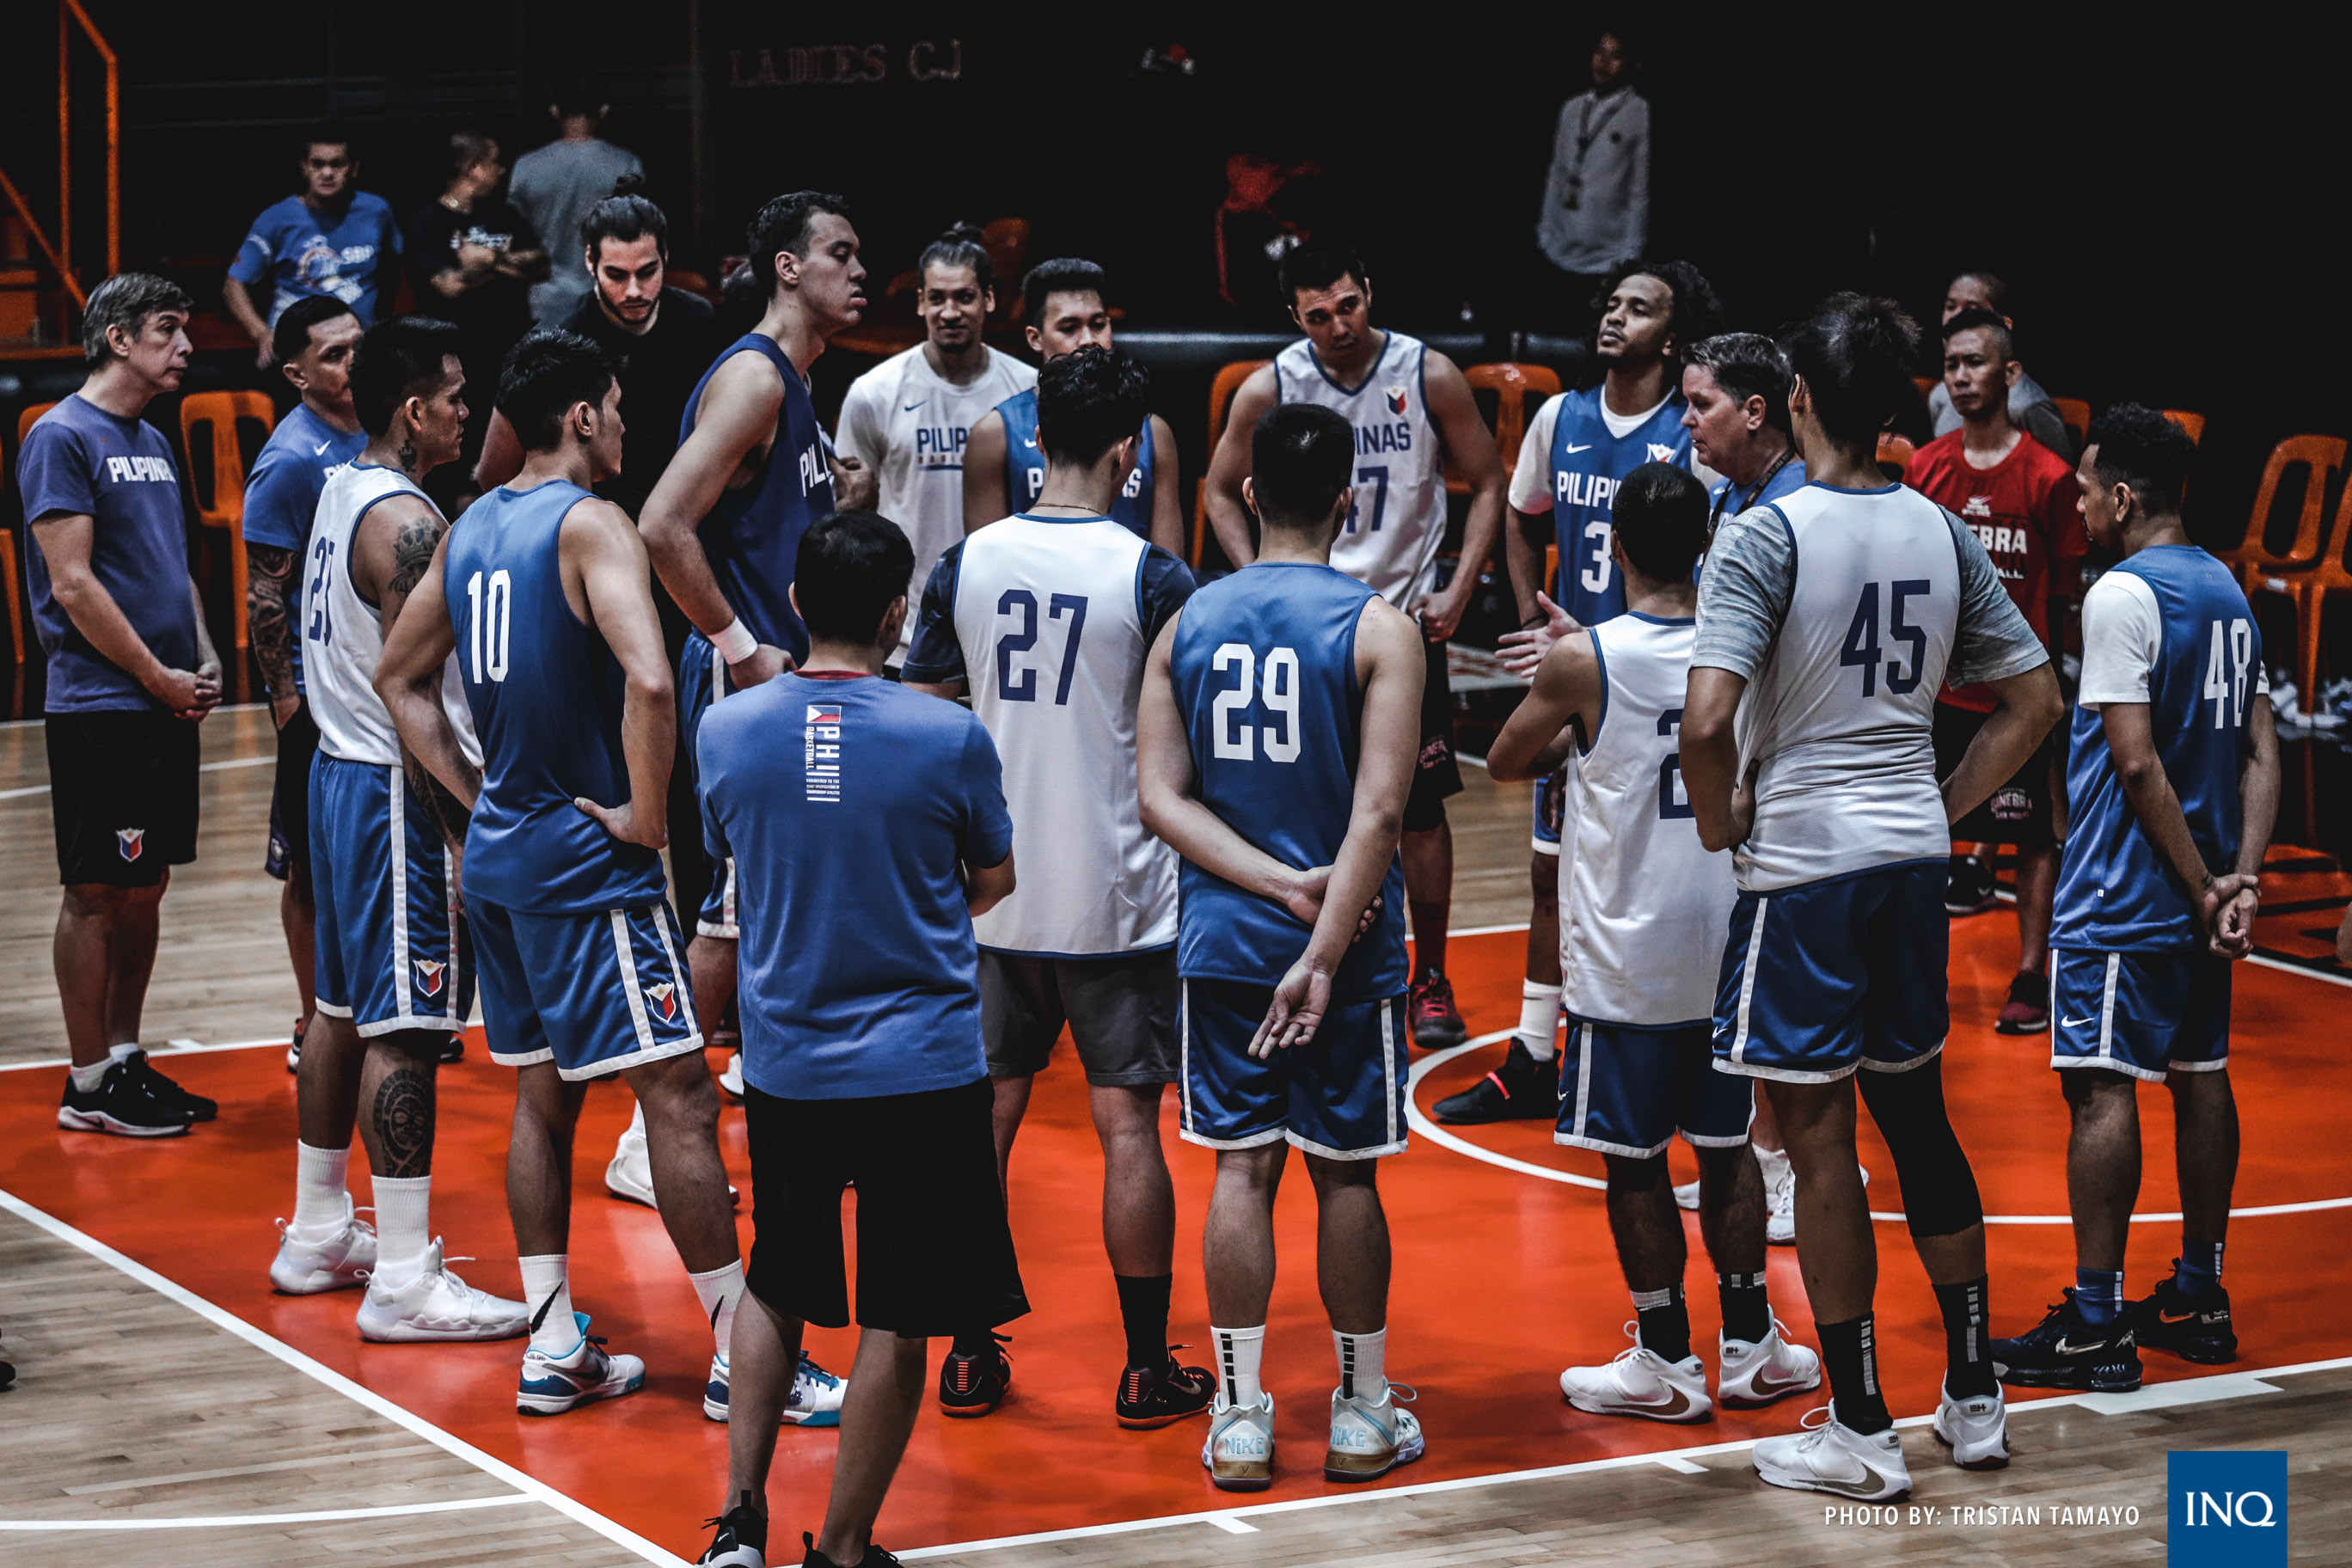 Nostalgia hits in Gilas Pilipinas' first practice for SEA Games